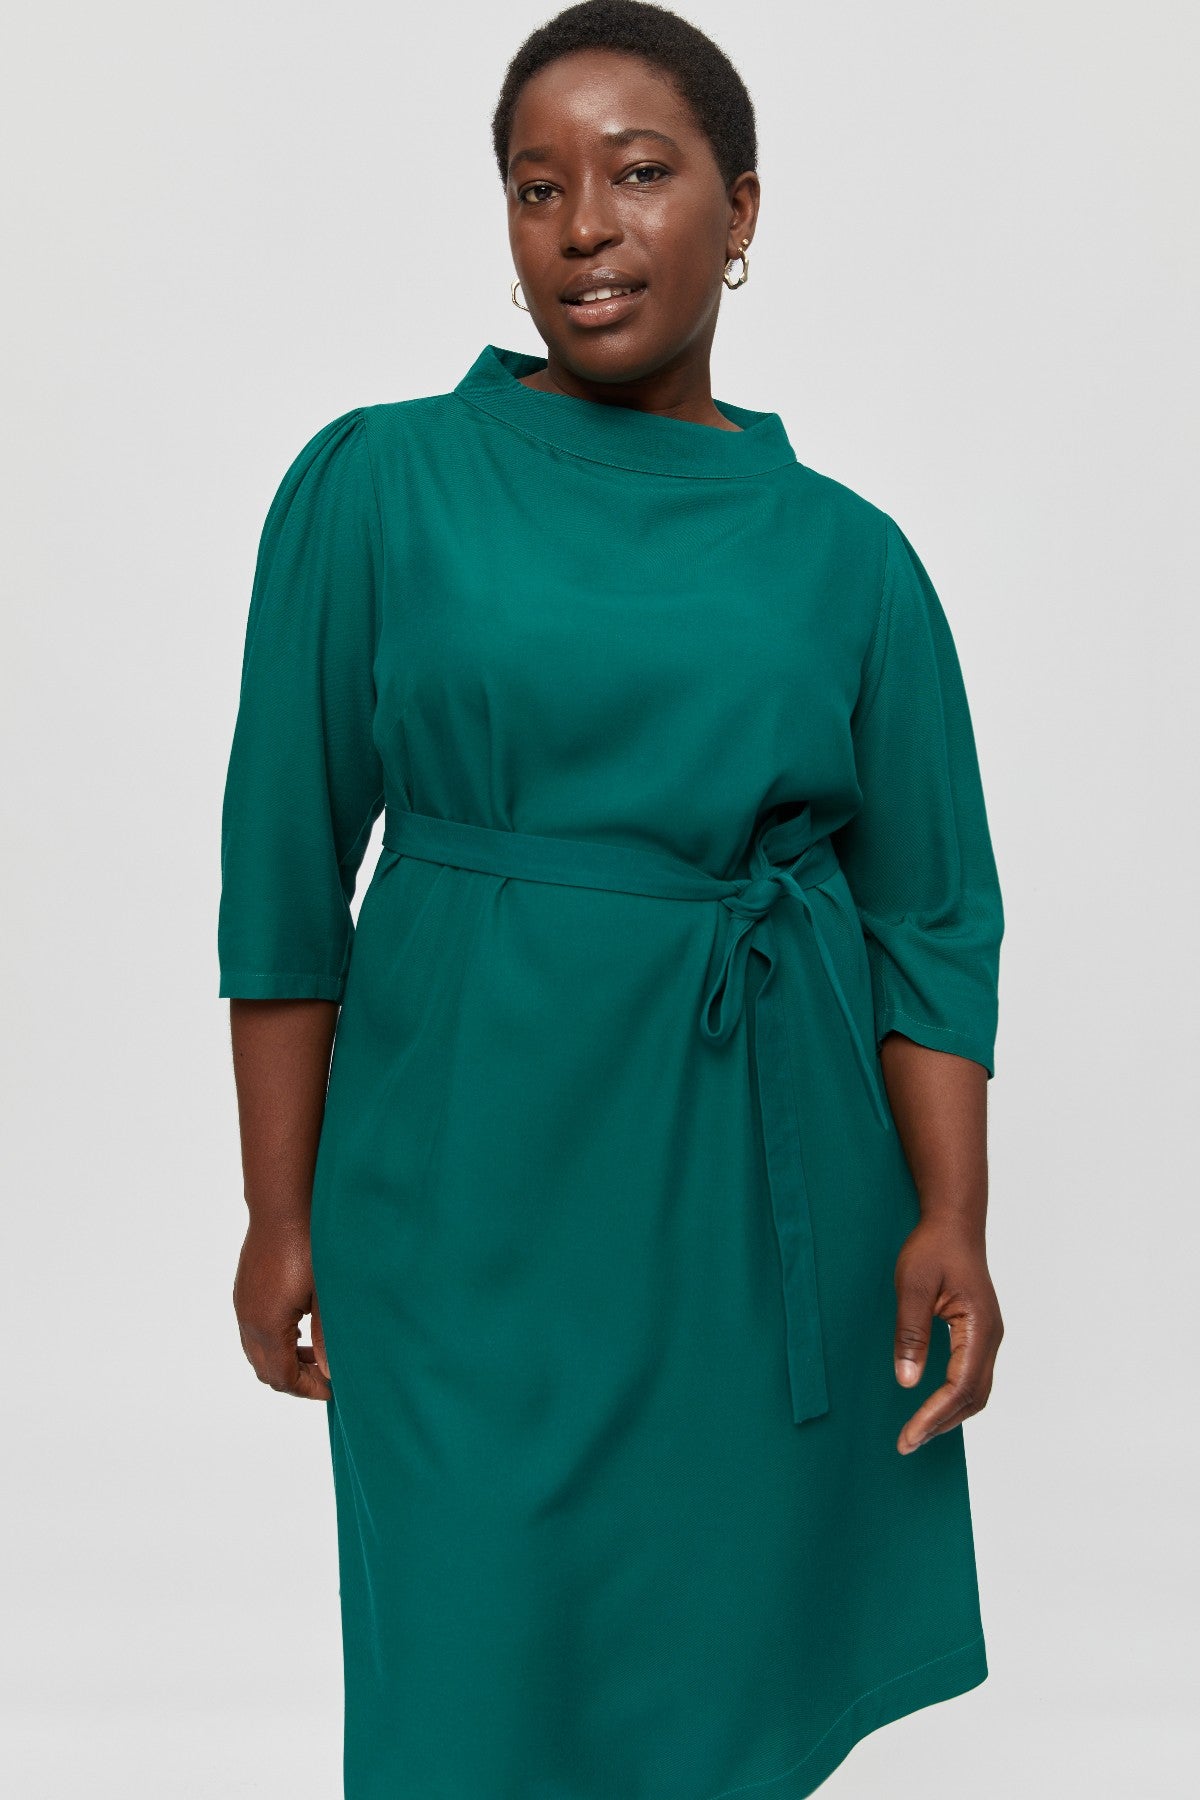 Suzi | Belted Angle Dress with Boat Neckline in Emerald Green